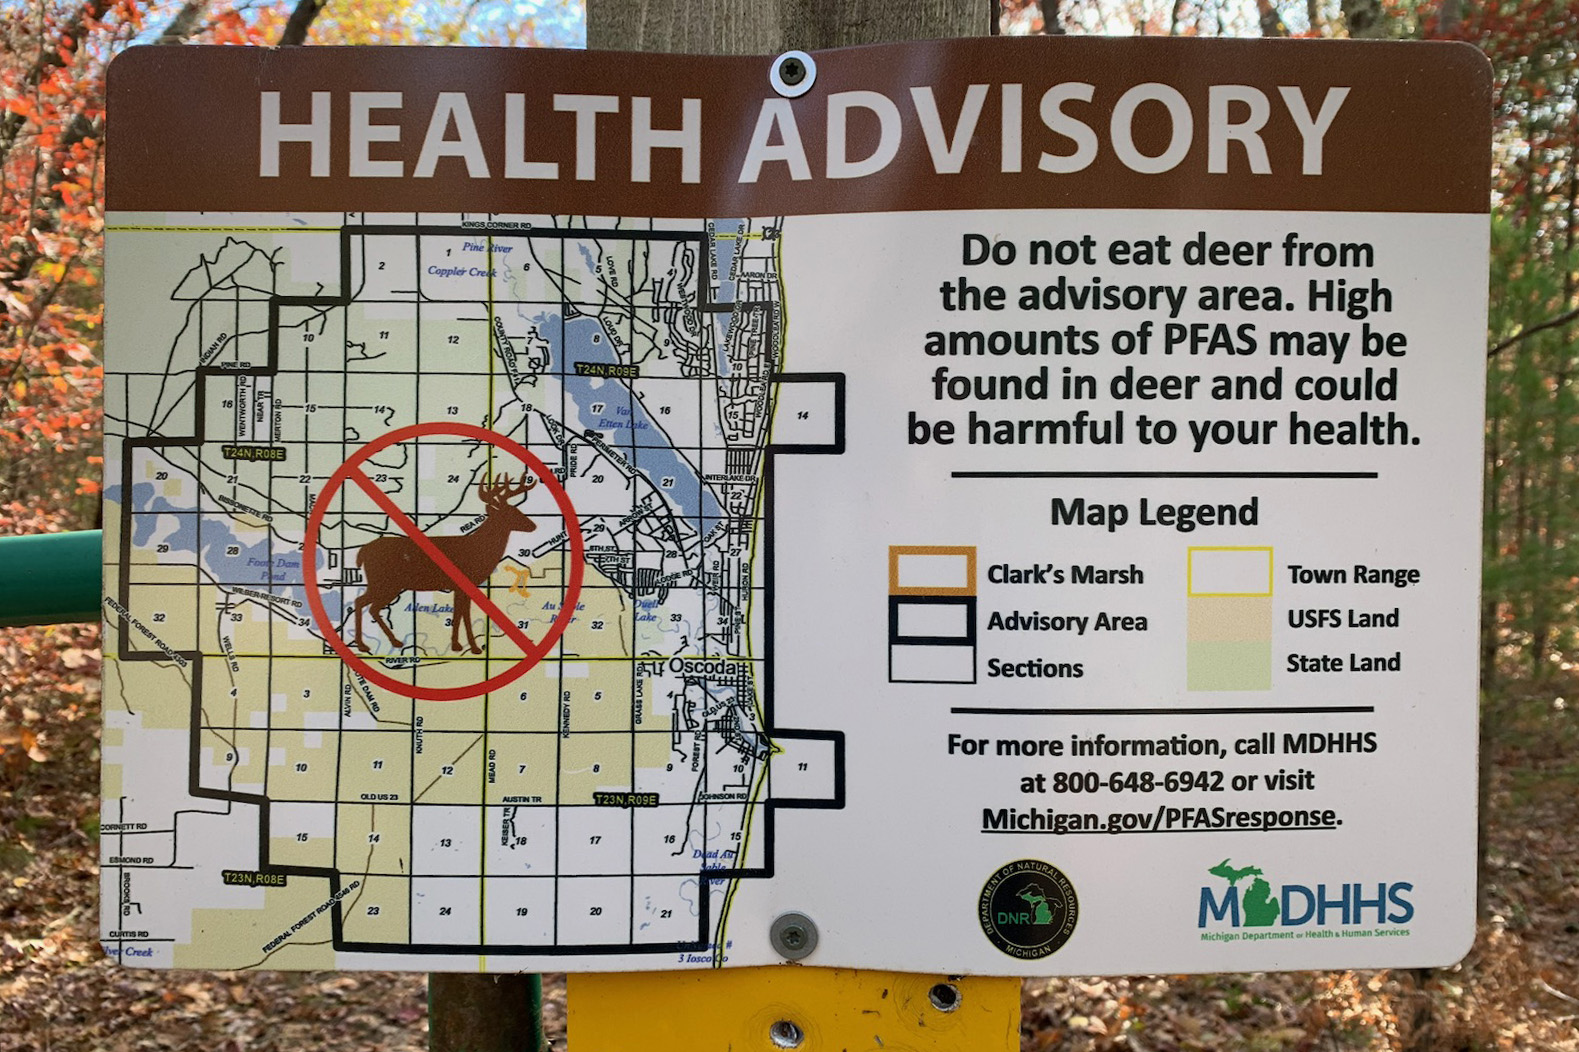 A health advisory sign posted at Clark’s Marsh reads, "HEALTH ADVISORY / Do not eat deer from the advisory area. High amounts of PFAS may be found in deer and could be harmful to your health." The sign includes a map and a legend that further details the area.